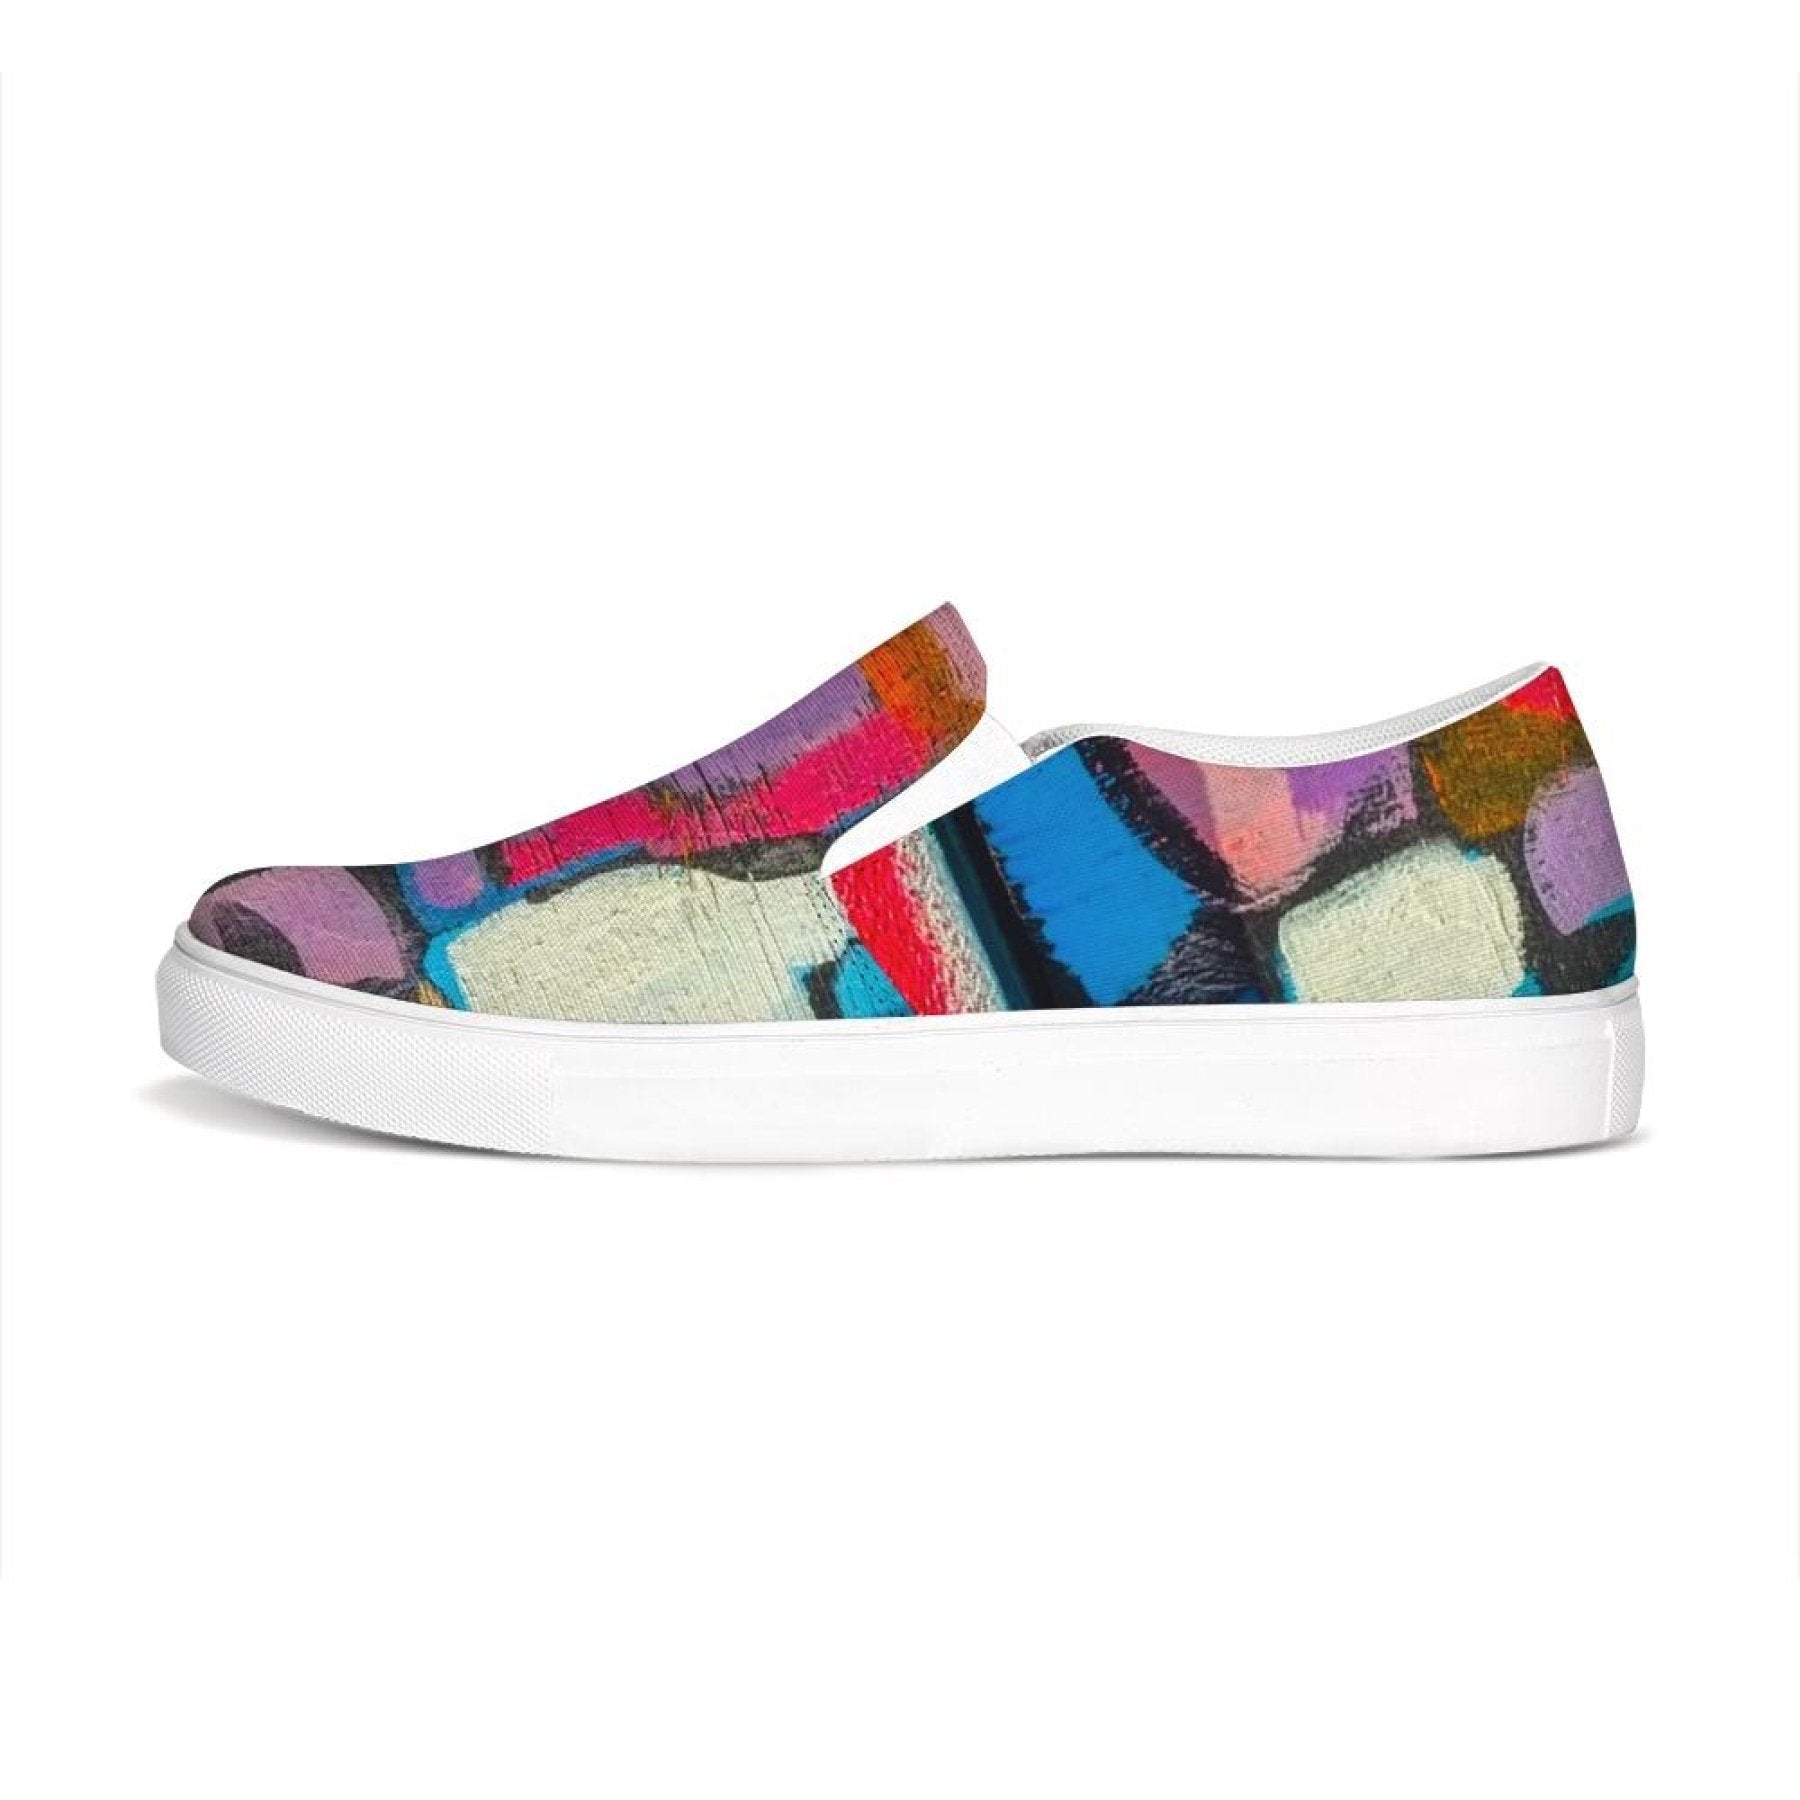 Uniquely You Womens Sneakers - Multicolor Geometric Style Low Top